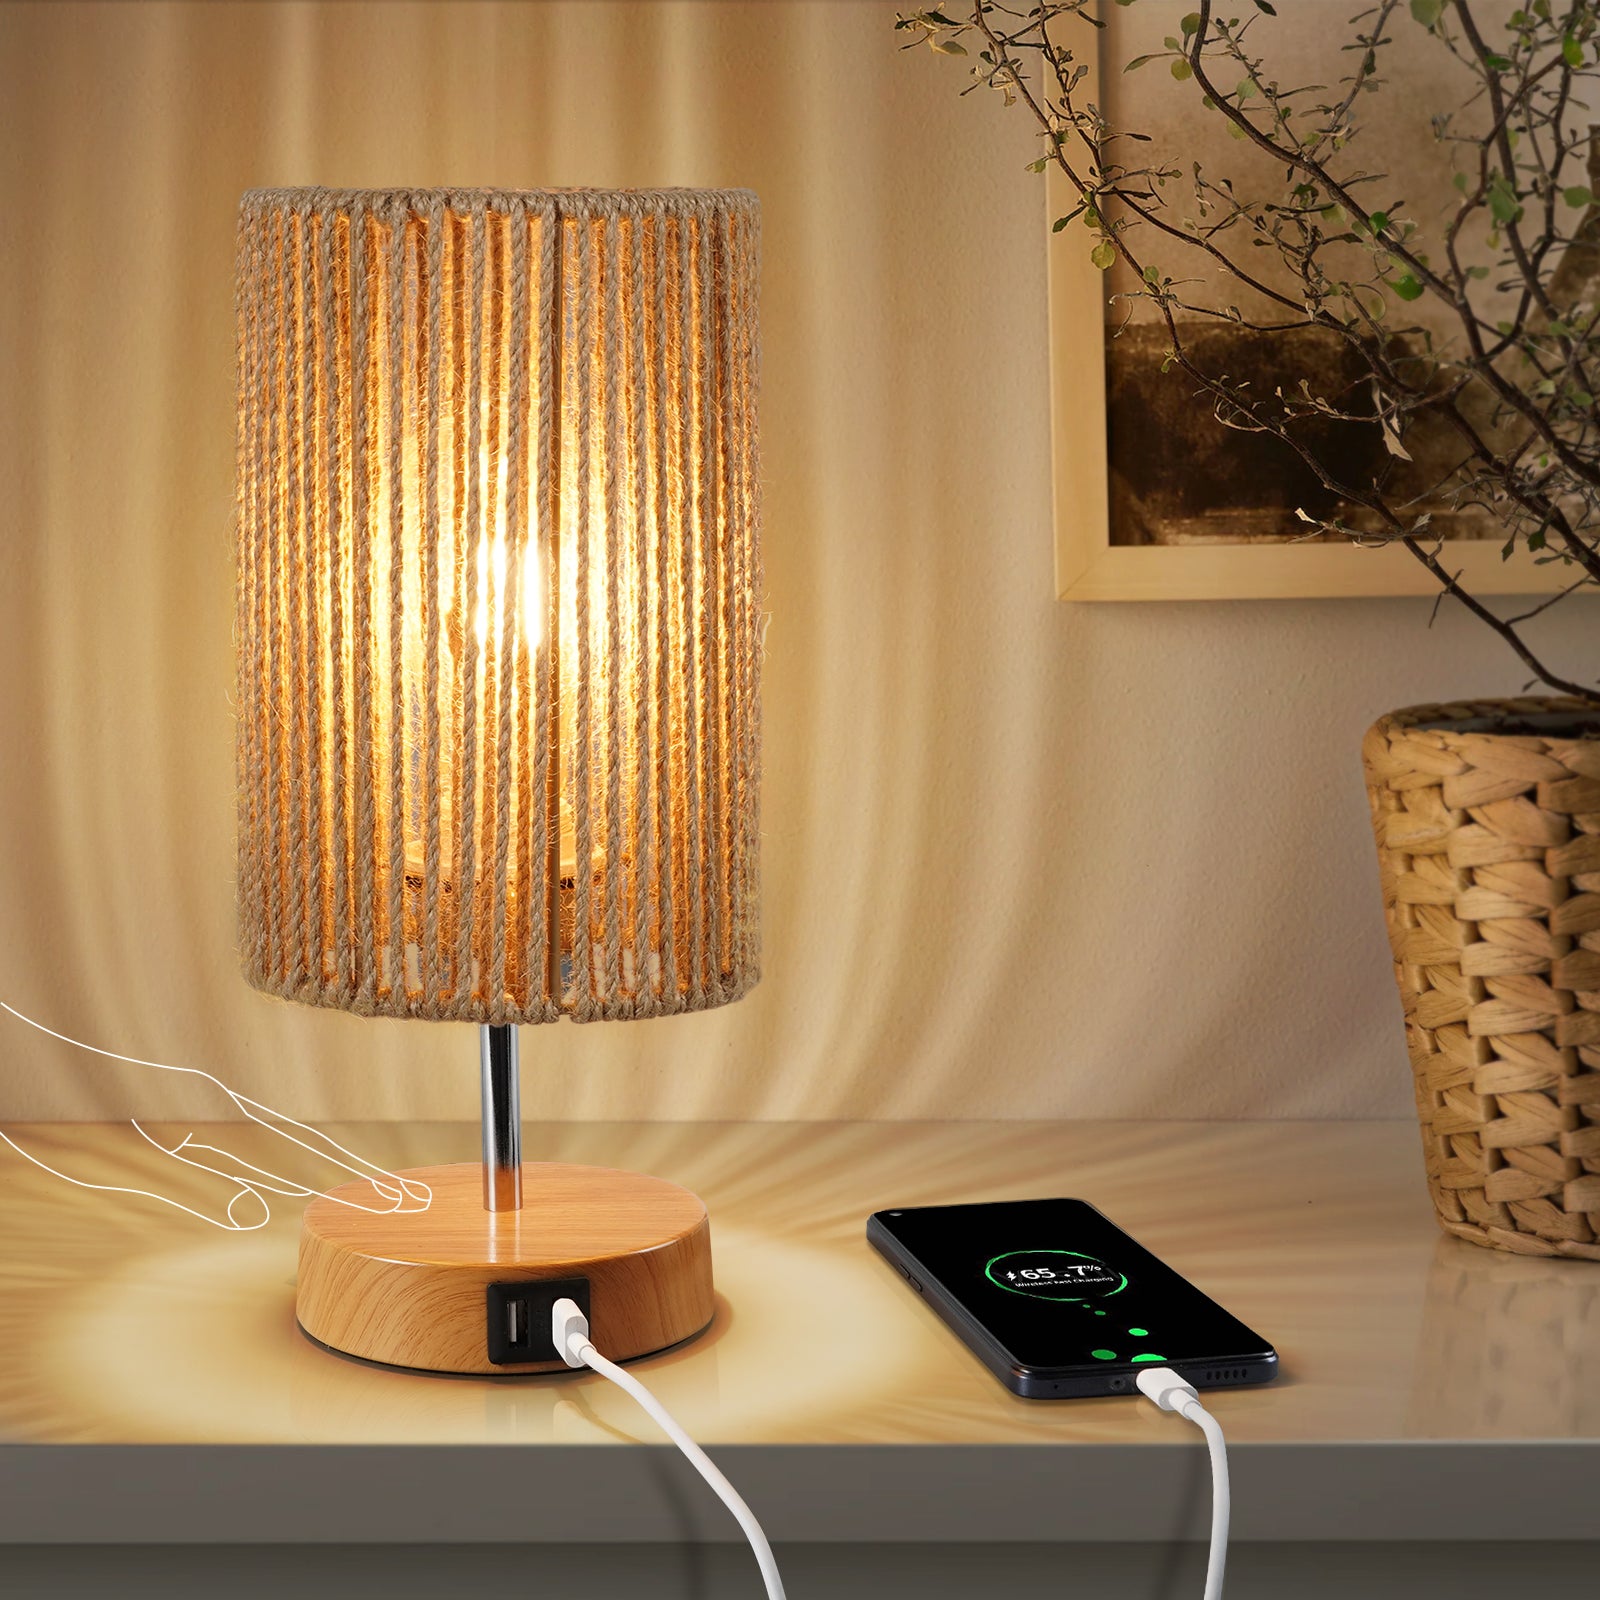 N08 Touch Table Lamp for Bedroom Rattan Lamp 3 Way Dimmable Bedside Lamps for Living Room with USB Charging Ports Lamp for Night Stands with E26 Bulb Boho Lamps for Bedrooms